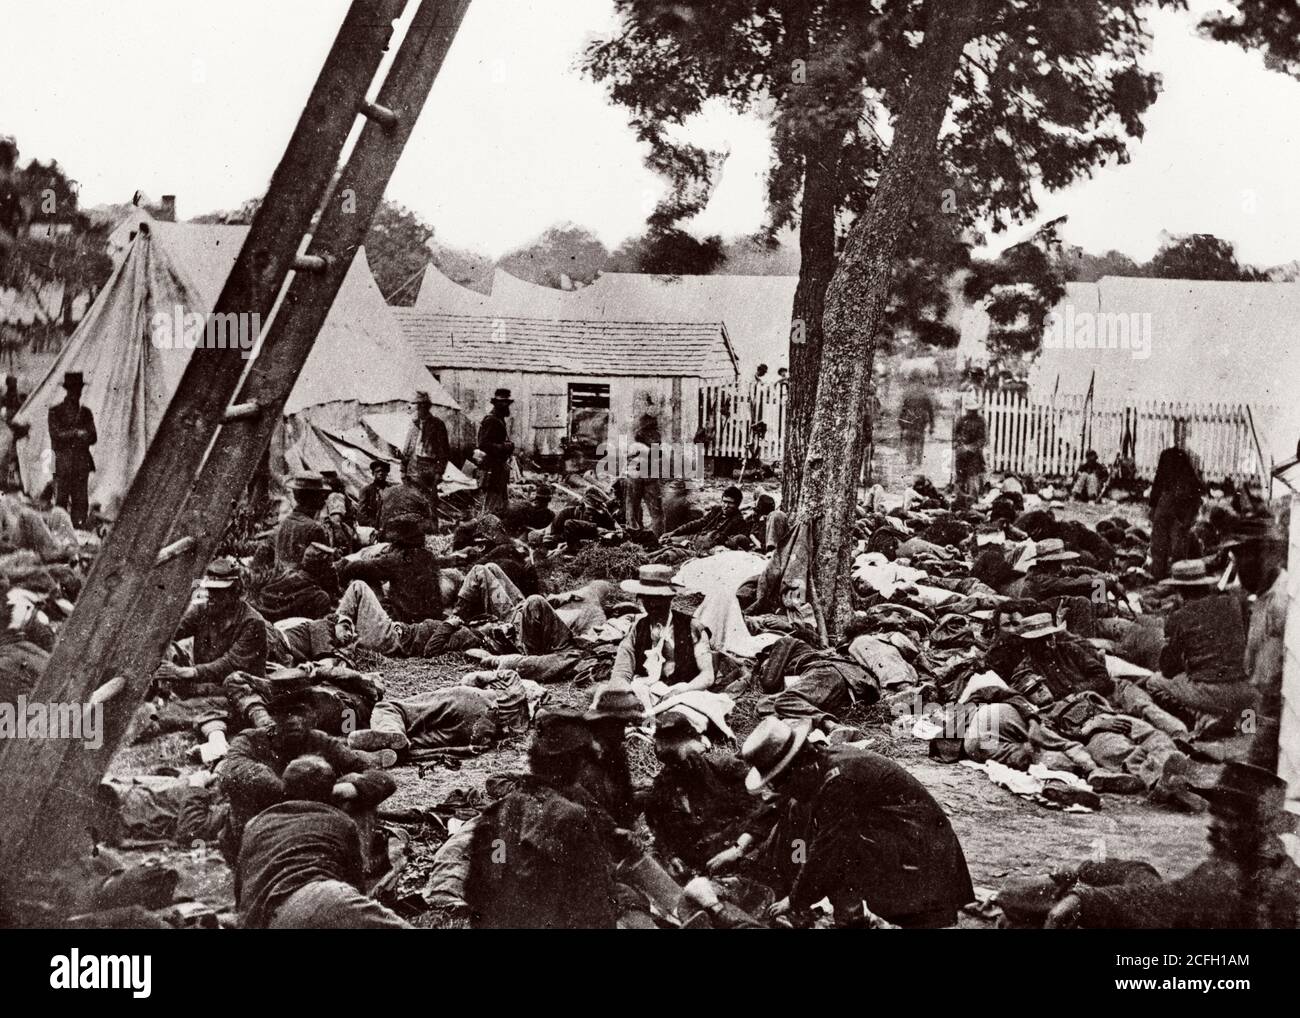 1800s 1860s JUNE 27 1862 UNION ARMY FIELD HOSPITAL DURING PENINSULA CAMPAIGN AMERICAN CIVIL WAR SAVAGE STATION VIRGINIA USA - h8891 SPL001 HARS B&W SADNESS NORTH AMERICA HEALTHCARE NORTH AMERICAN WARS WIDE ANGLE WELLNESS PREVENTION HEALING UNION COURAGE DIAGNOSIS EXTERIOR HEALTH CARE IMPAIRMENT OCCUPATIONS TREATMENT UNIFORMS WOUNDED RECOVERING CAMPAIGN CONCEPTUAL 1860s CONFEDERATE MID-ADULT SAVAGE VA 1862 AMERICAN CIVIL WAR BATTLES BLACK AND WHITE CIVIL WAR CONFLICTS CSA DISEASE DURING OLD FASHIONED PENINSULA Stock Photo